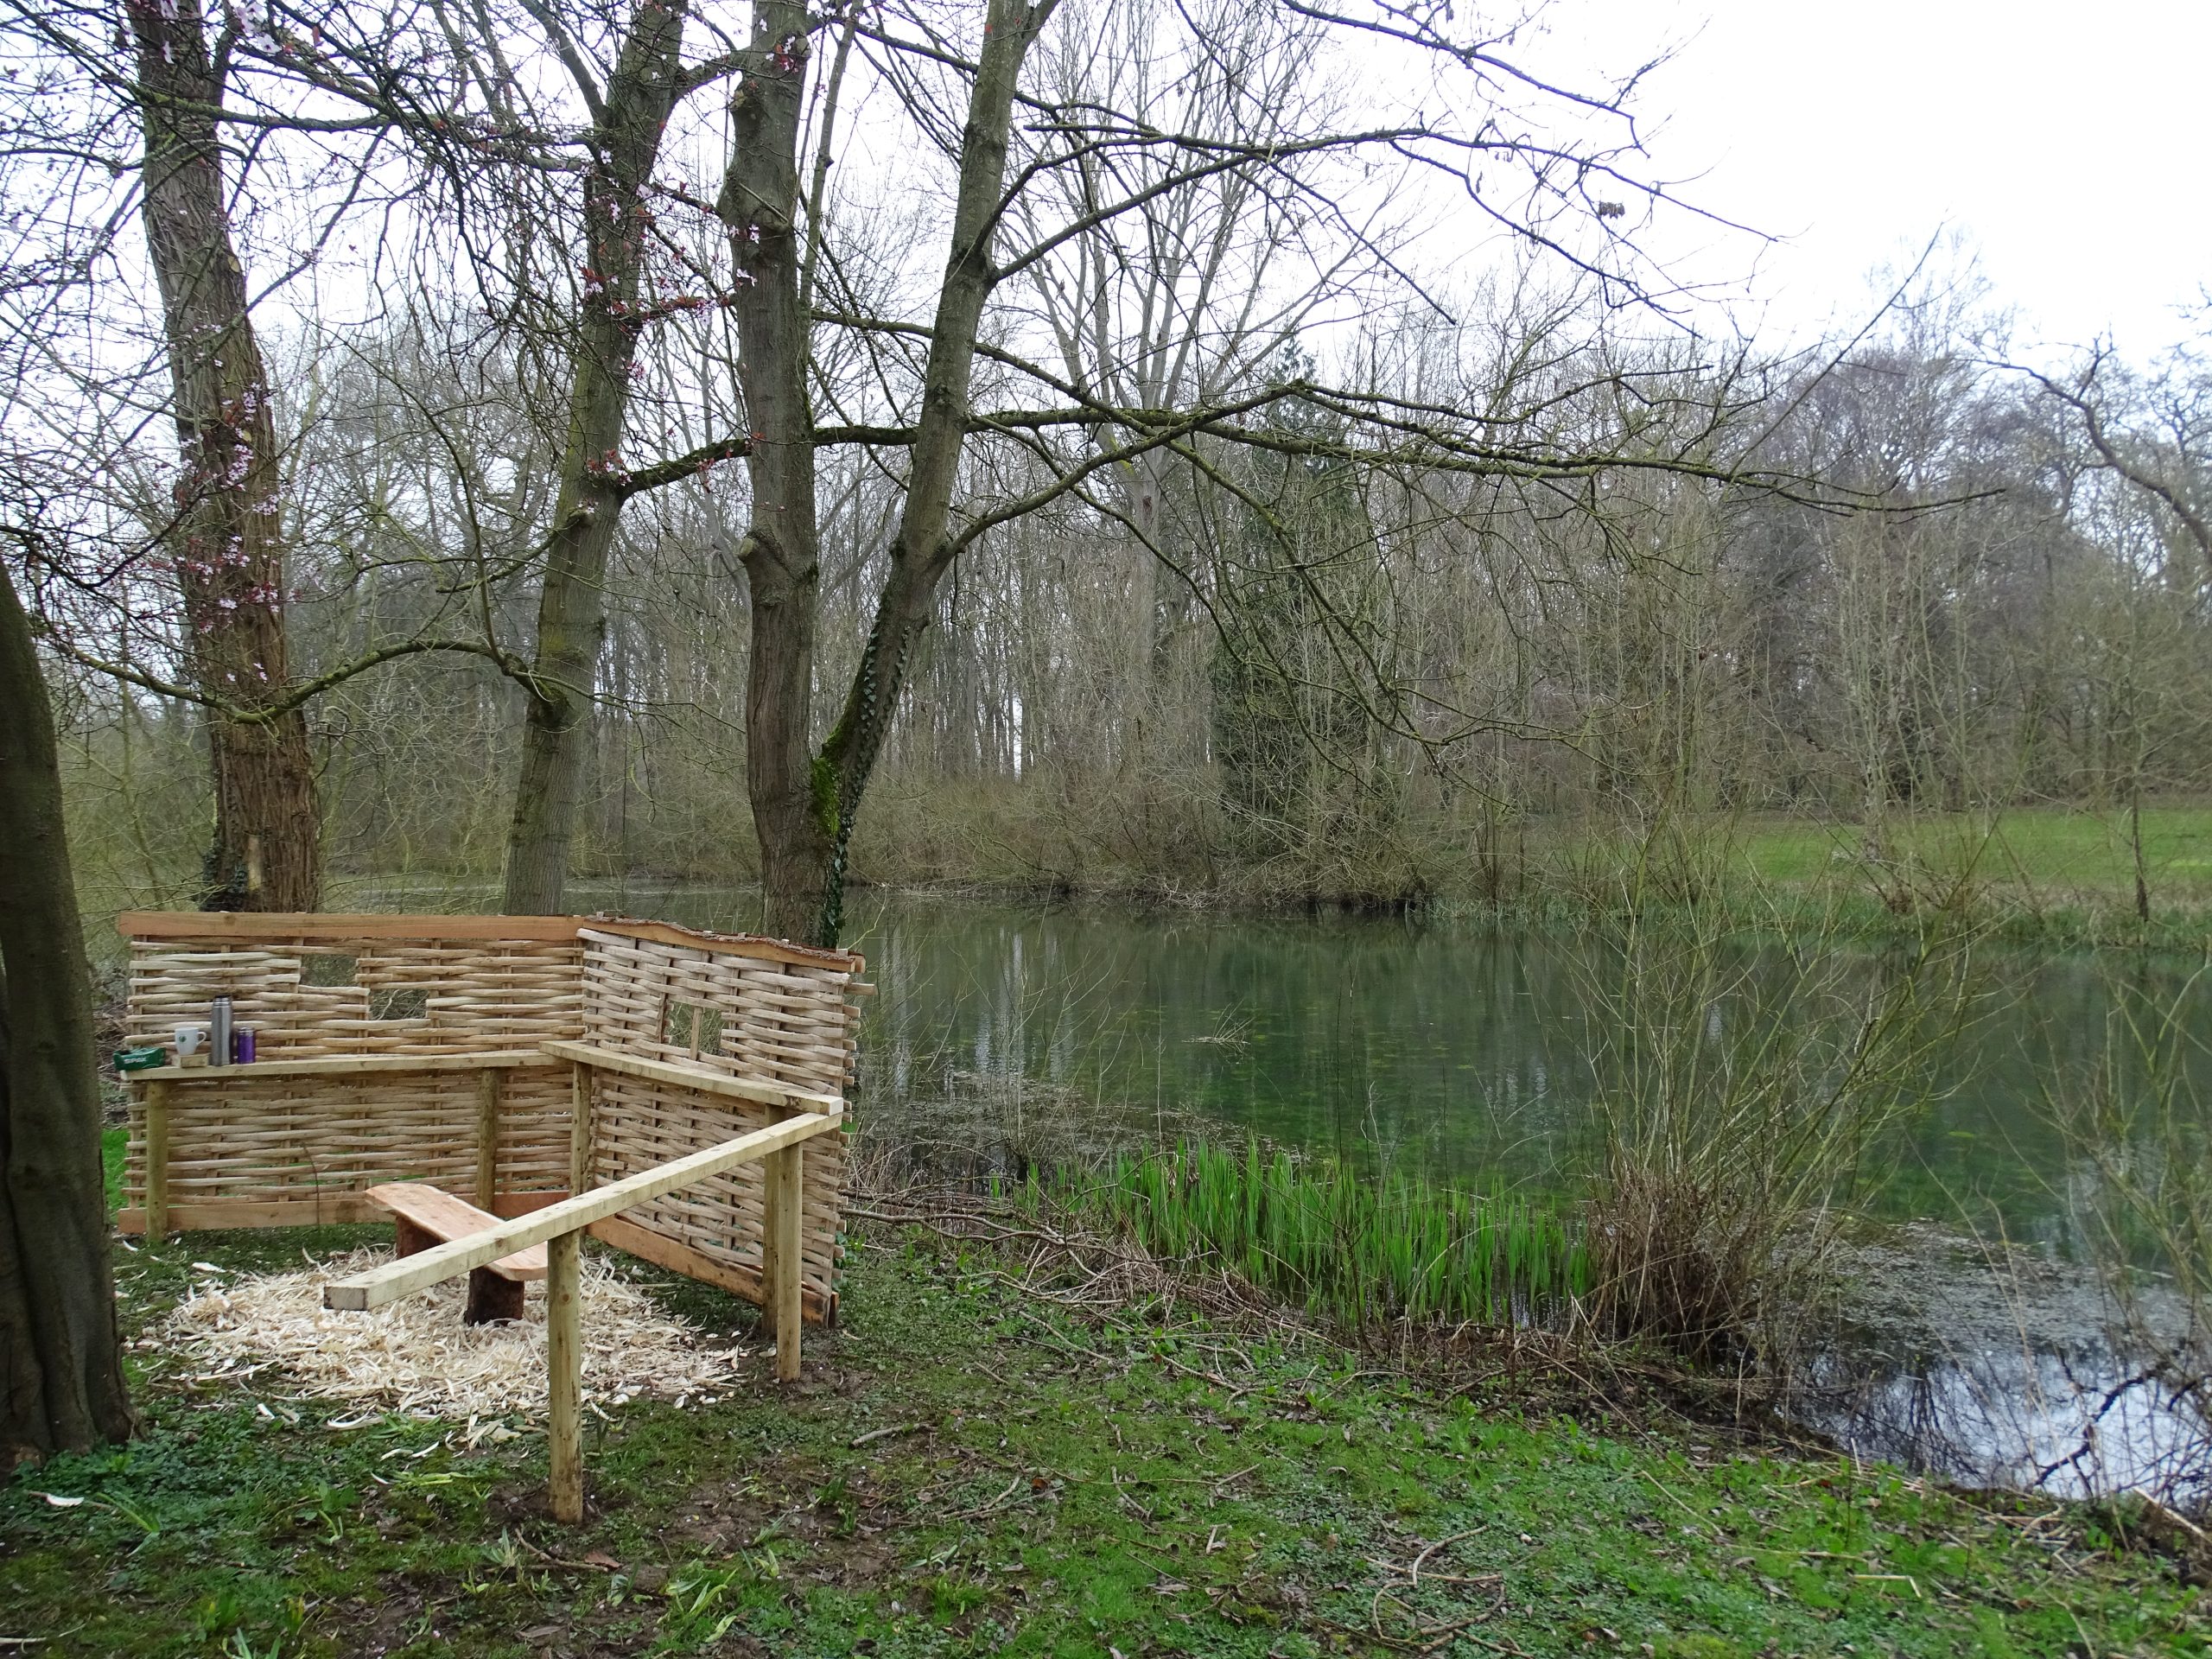 Outdoor Bird Viewing Point Over Pond